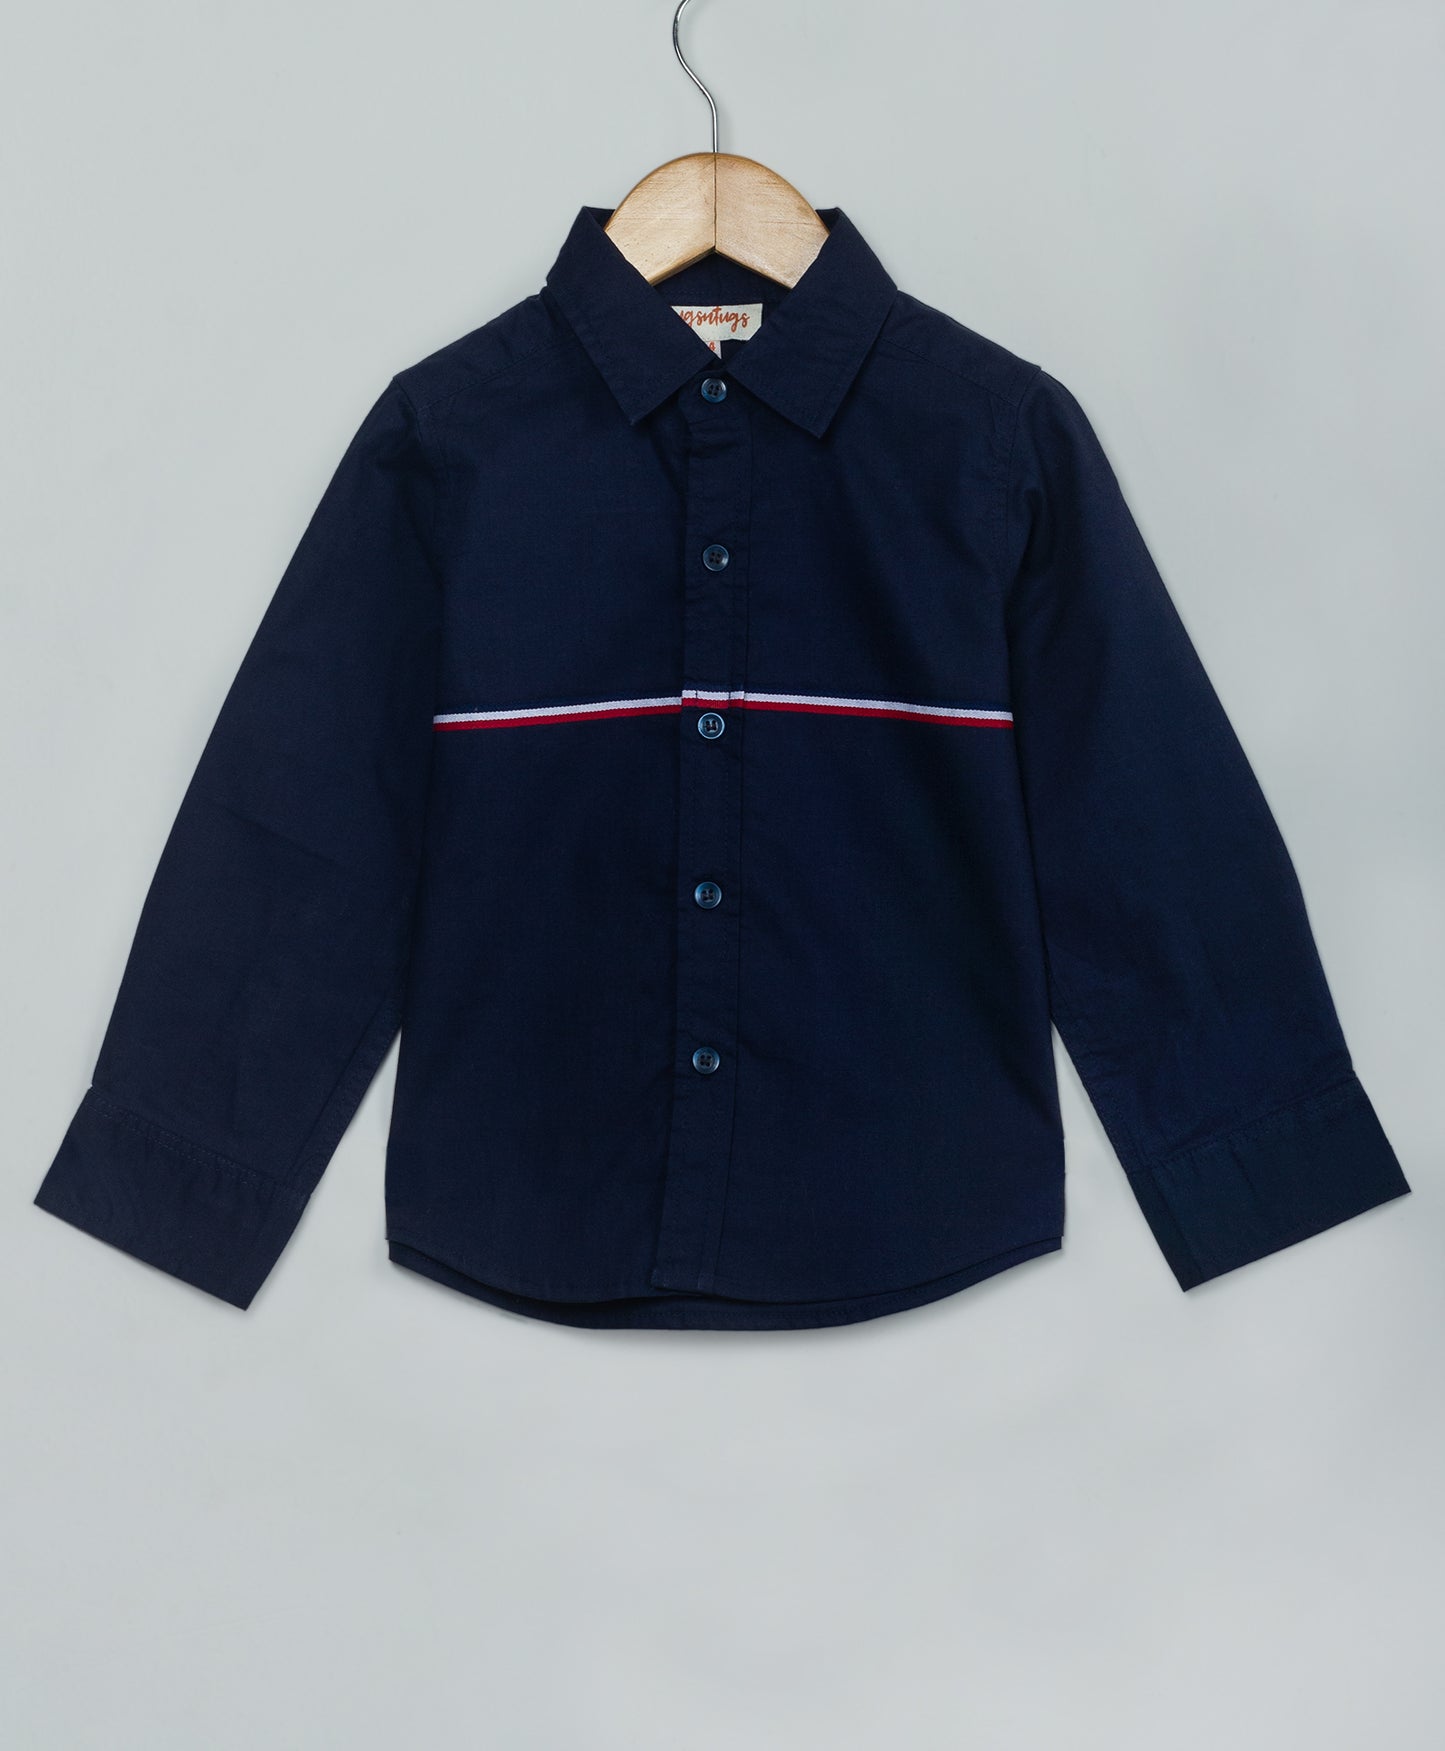 NAVY SHIRT WITH CONTRAST PIPING ACROSS CHEST